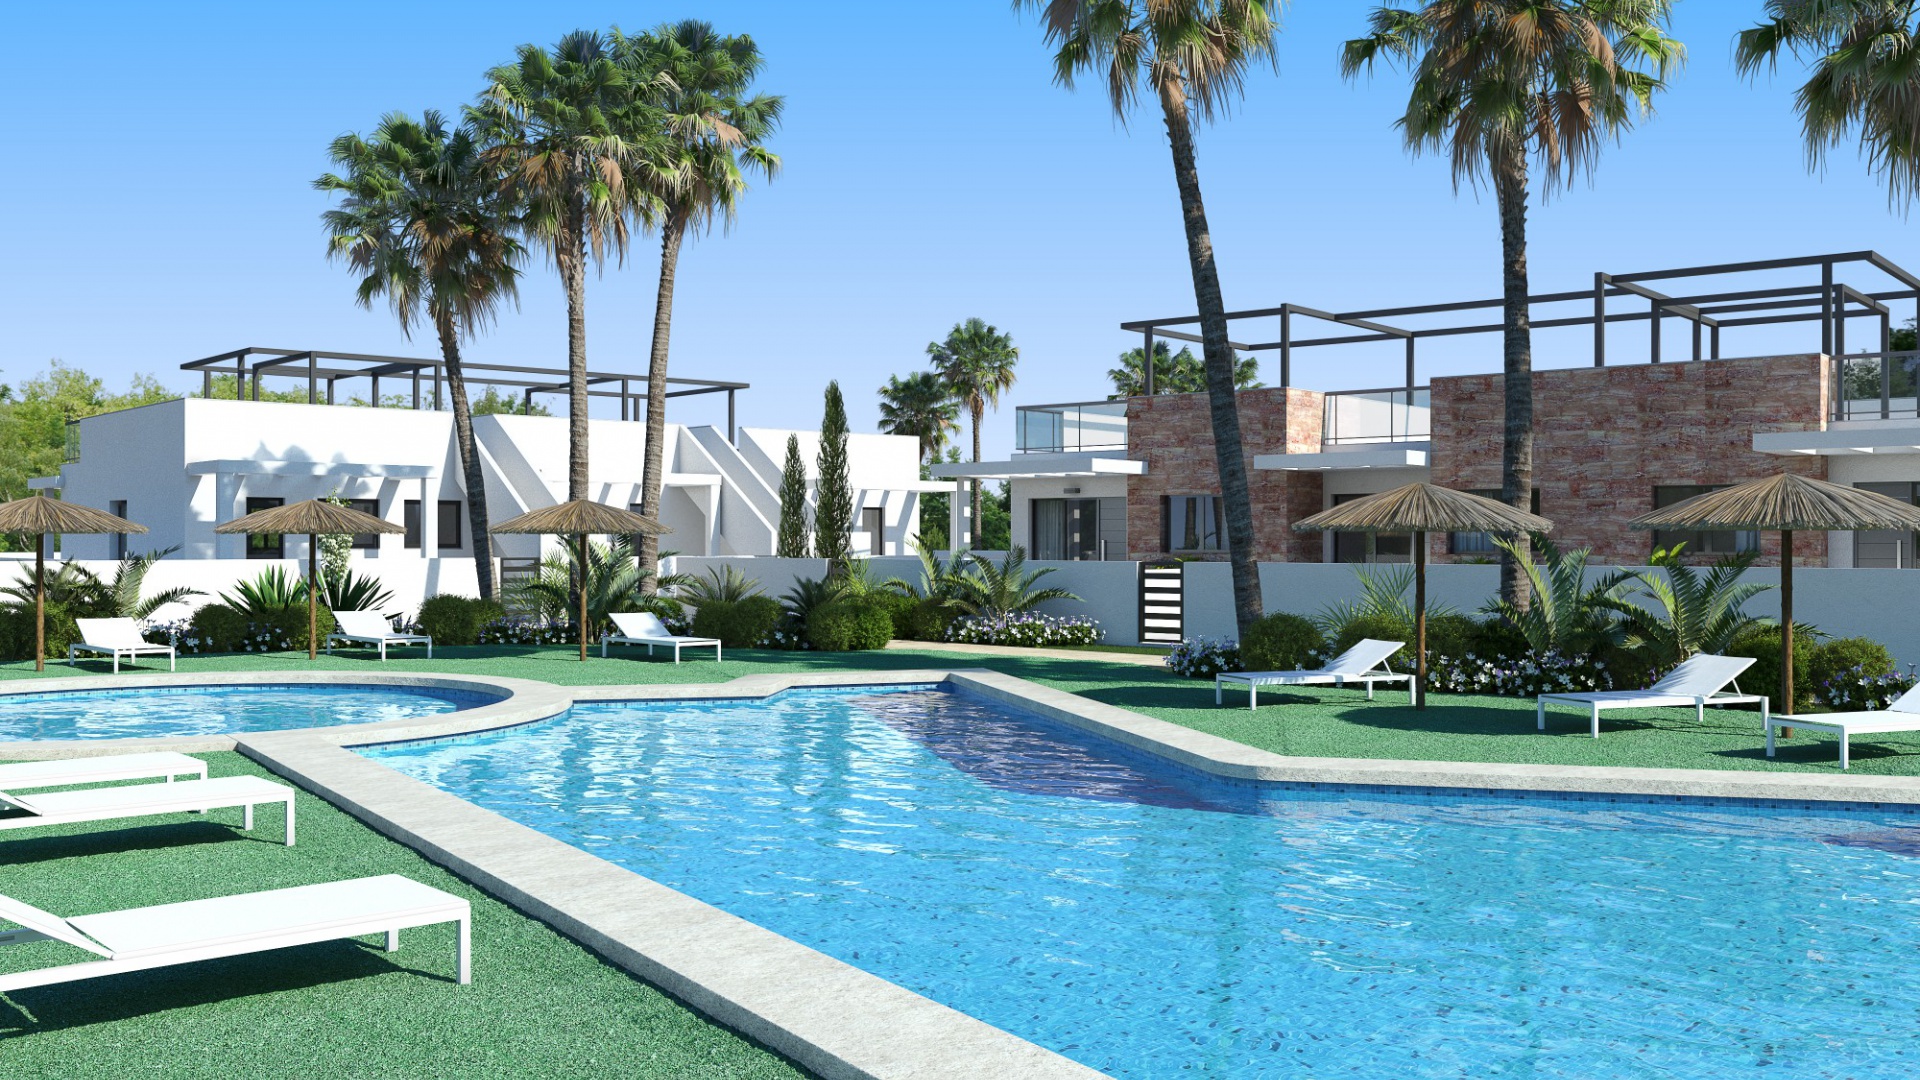 Residencial Iseo Mil Palmeras apartments